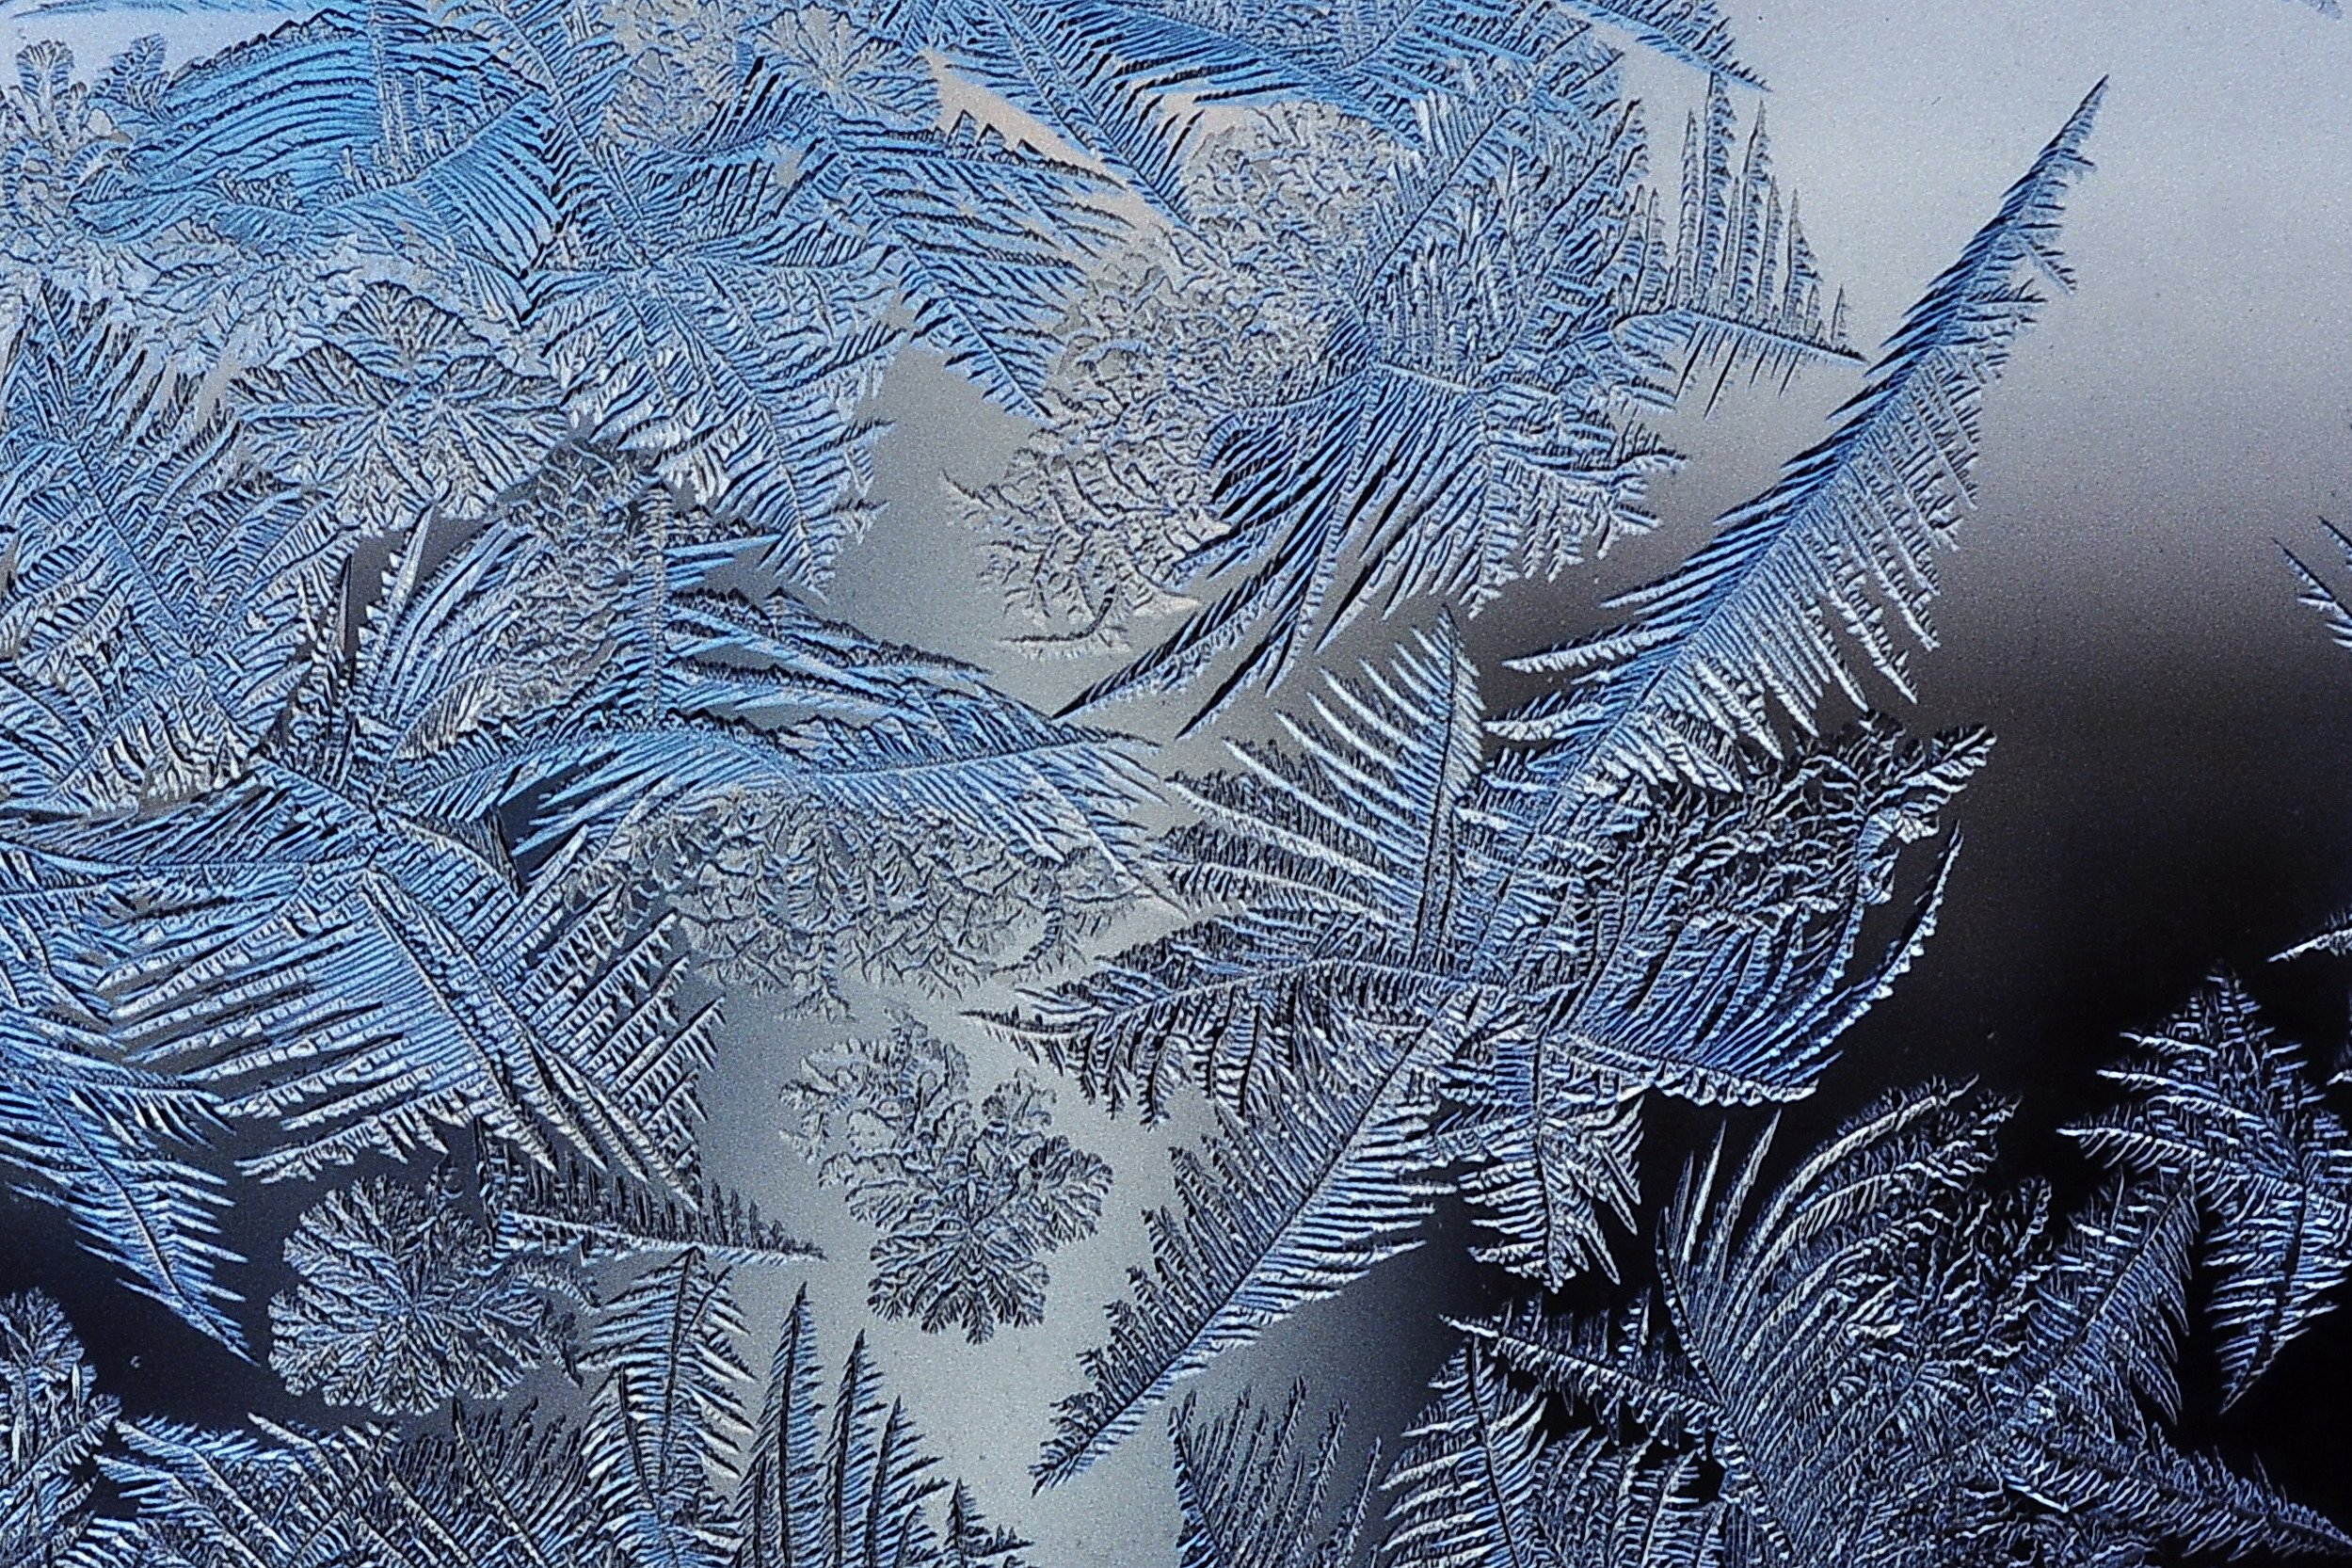 Frost Patterns, Schnobby, CC BY-SA 3.0, via Wikimedia Commons